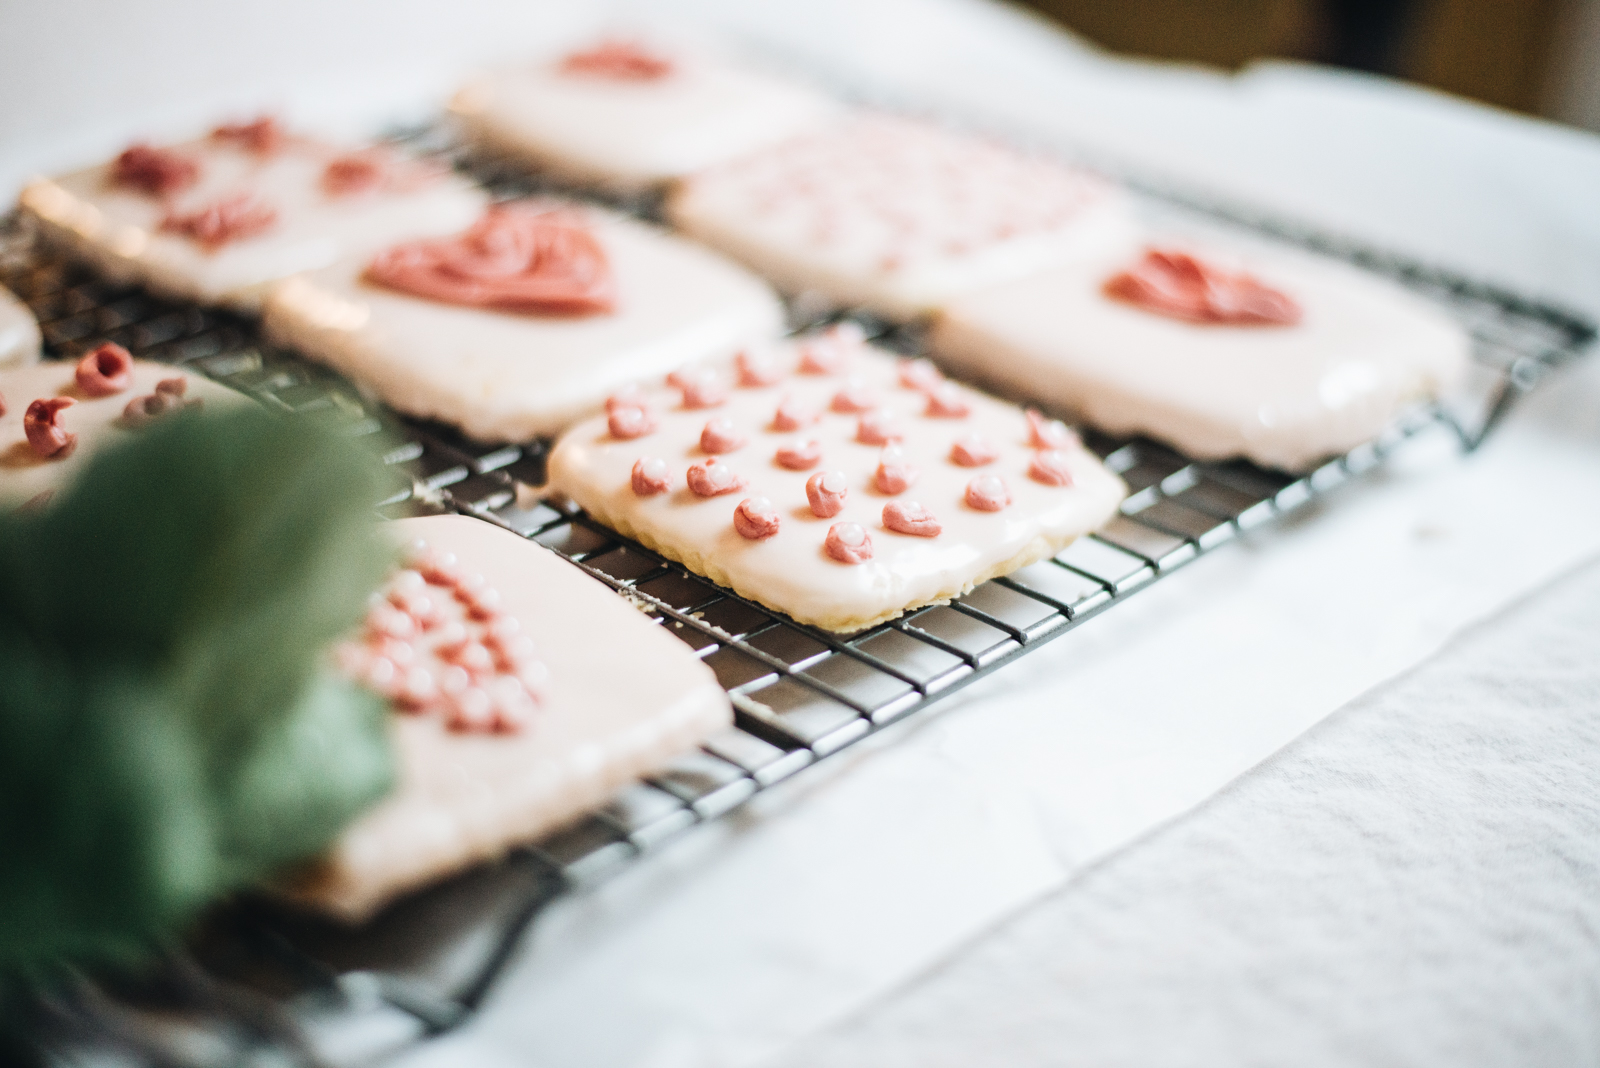 dipped sugar cookies in glaze on cooling rack valentine's day embroidery kids cookies casey wiegand